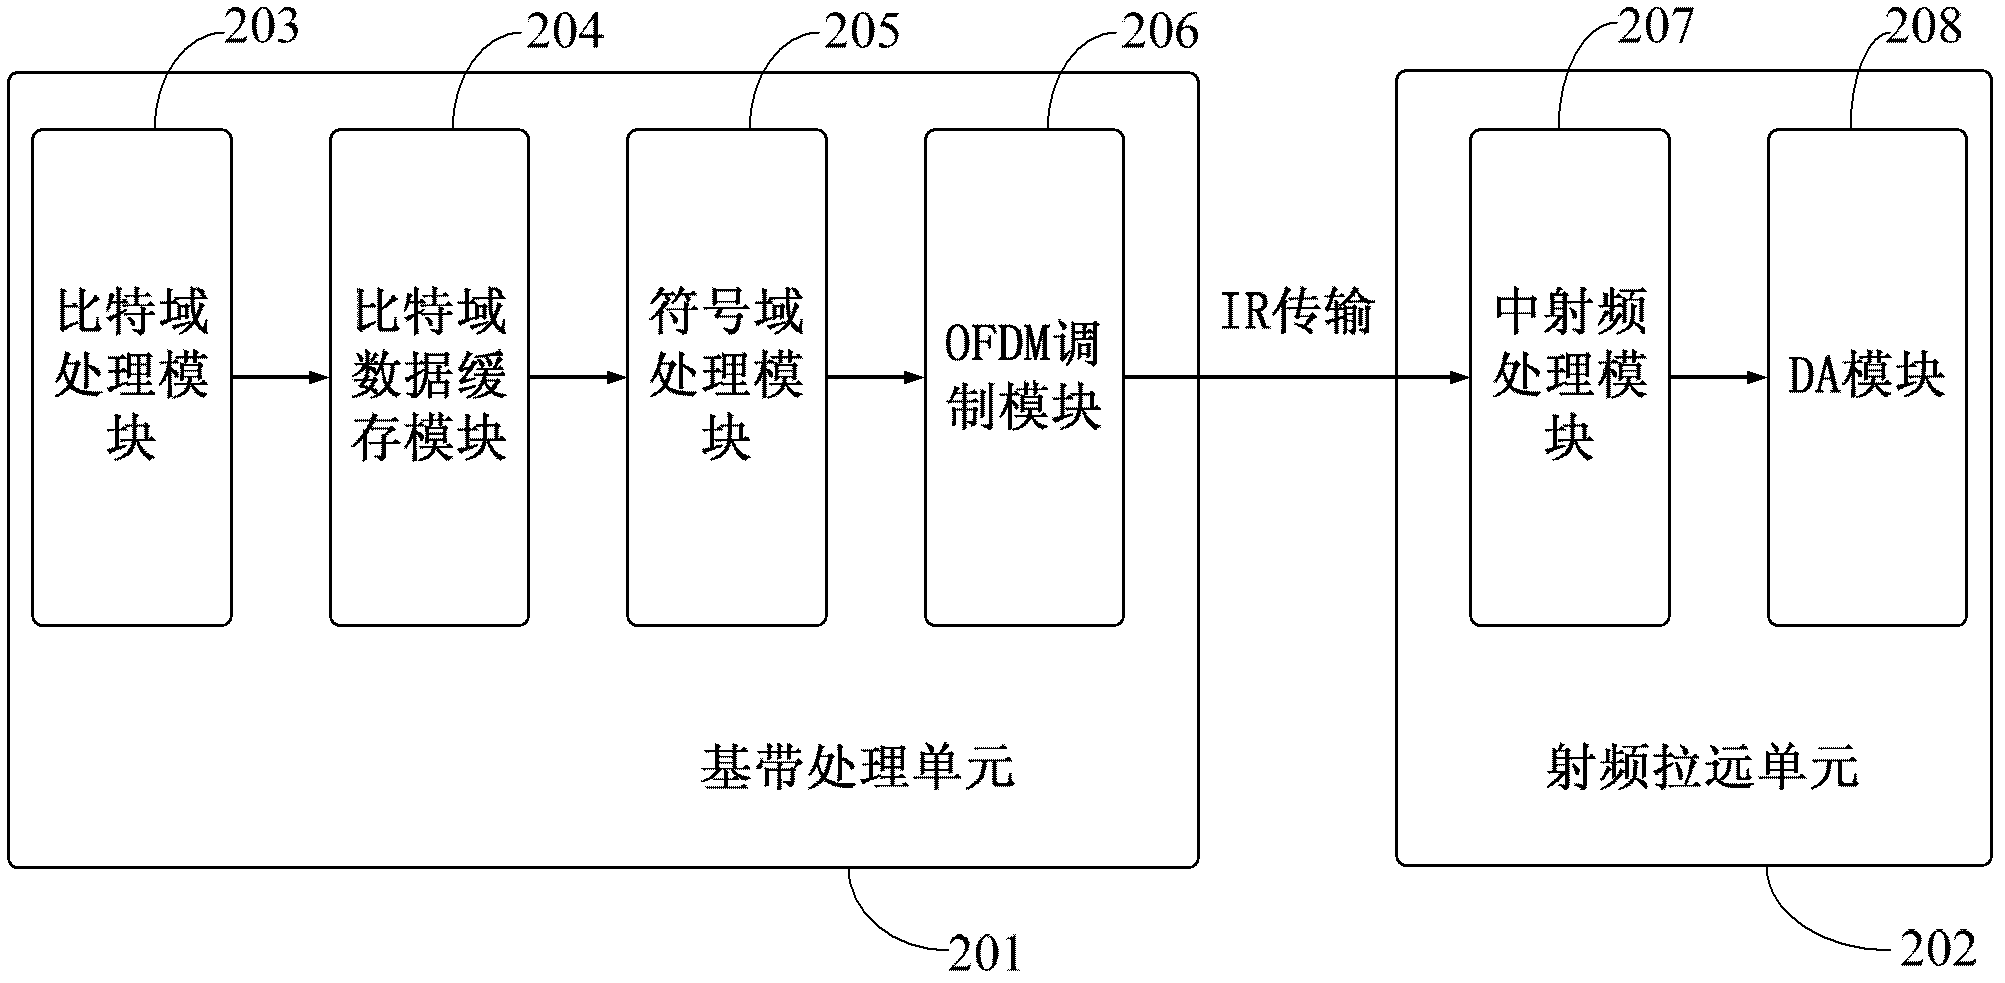 Optical fiber time delay compensation method and device suitable for long term evolution (LTE) system